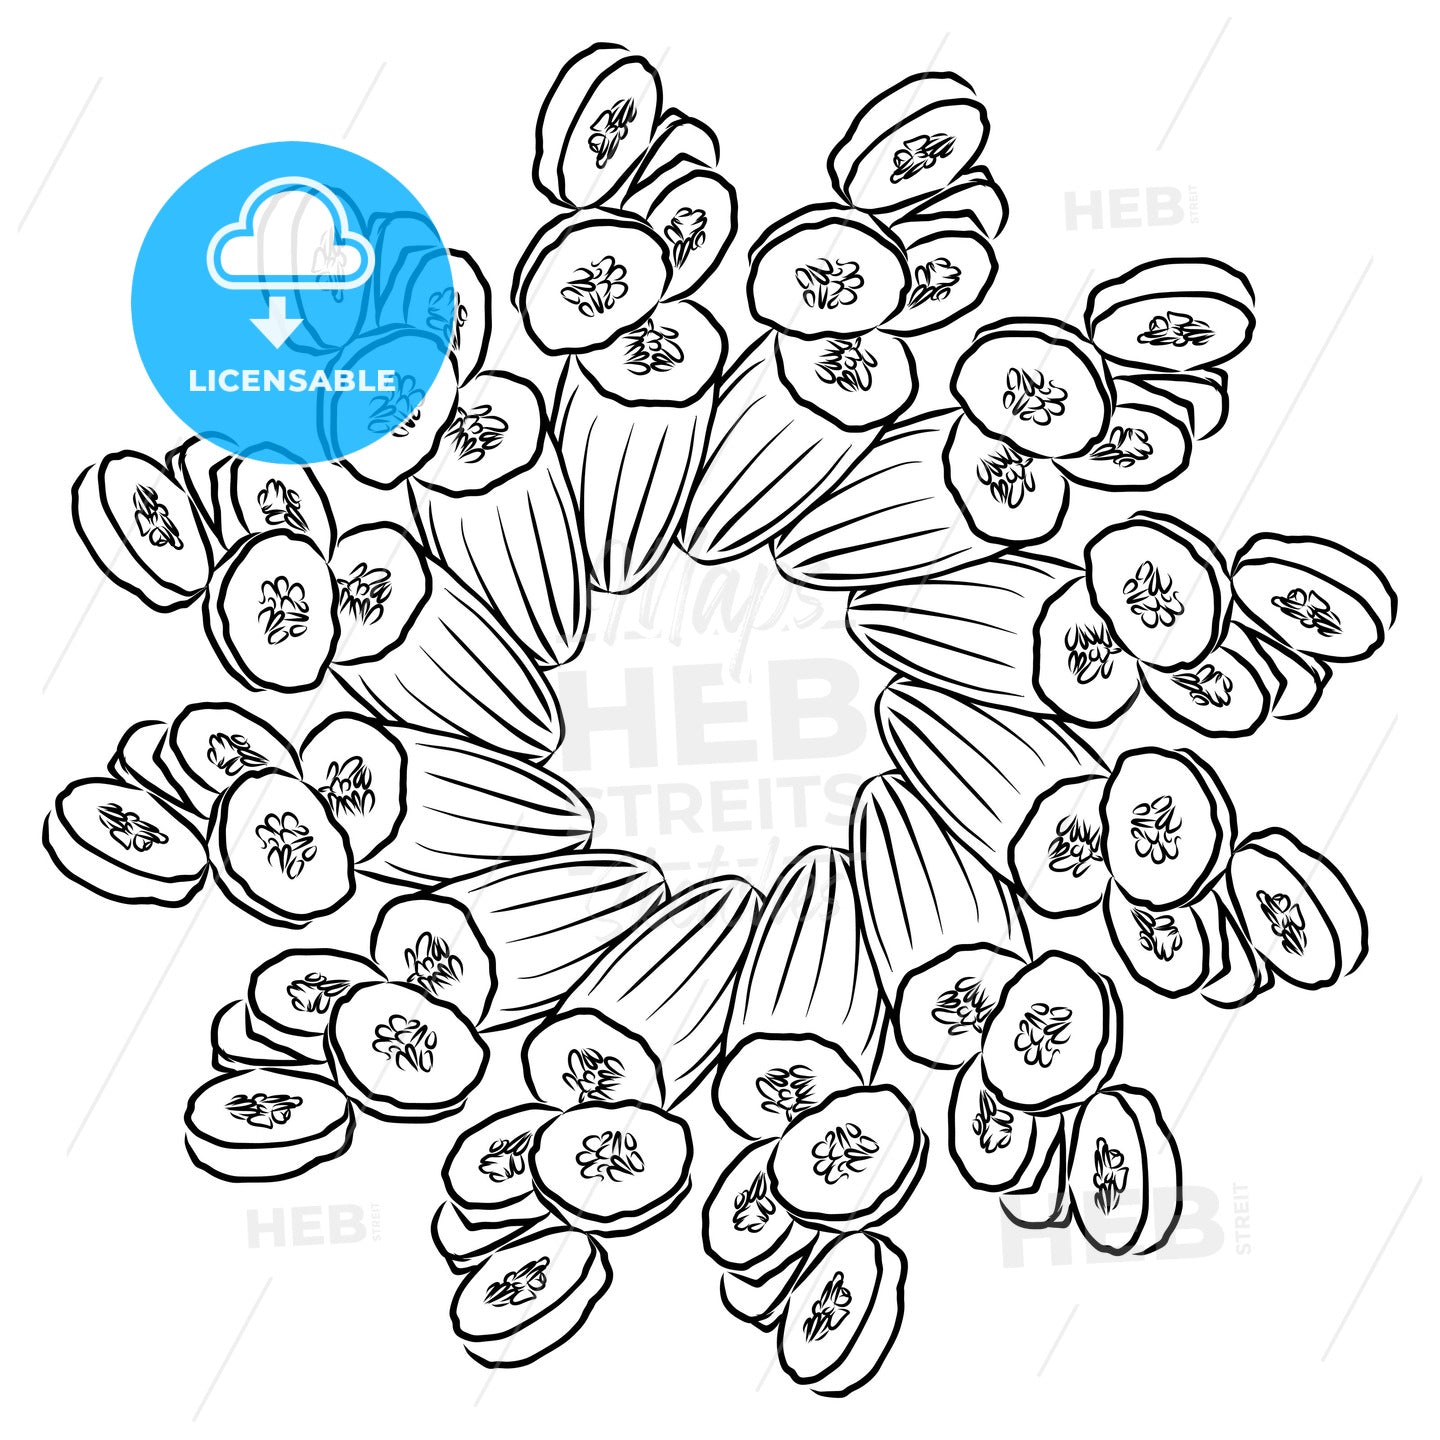 Outline sketch of Cucumbers arranged in a circle – instant download